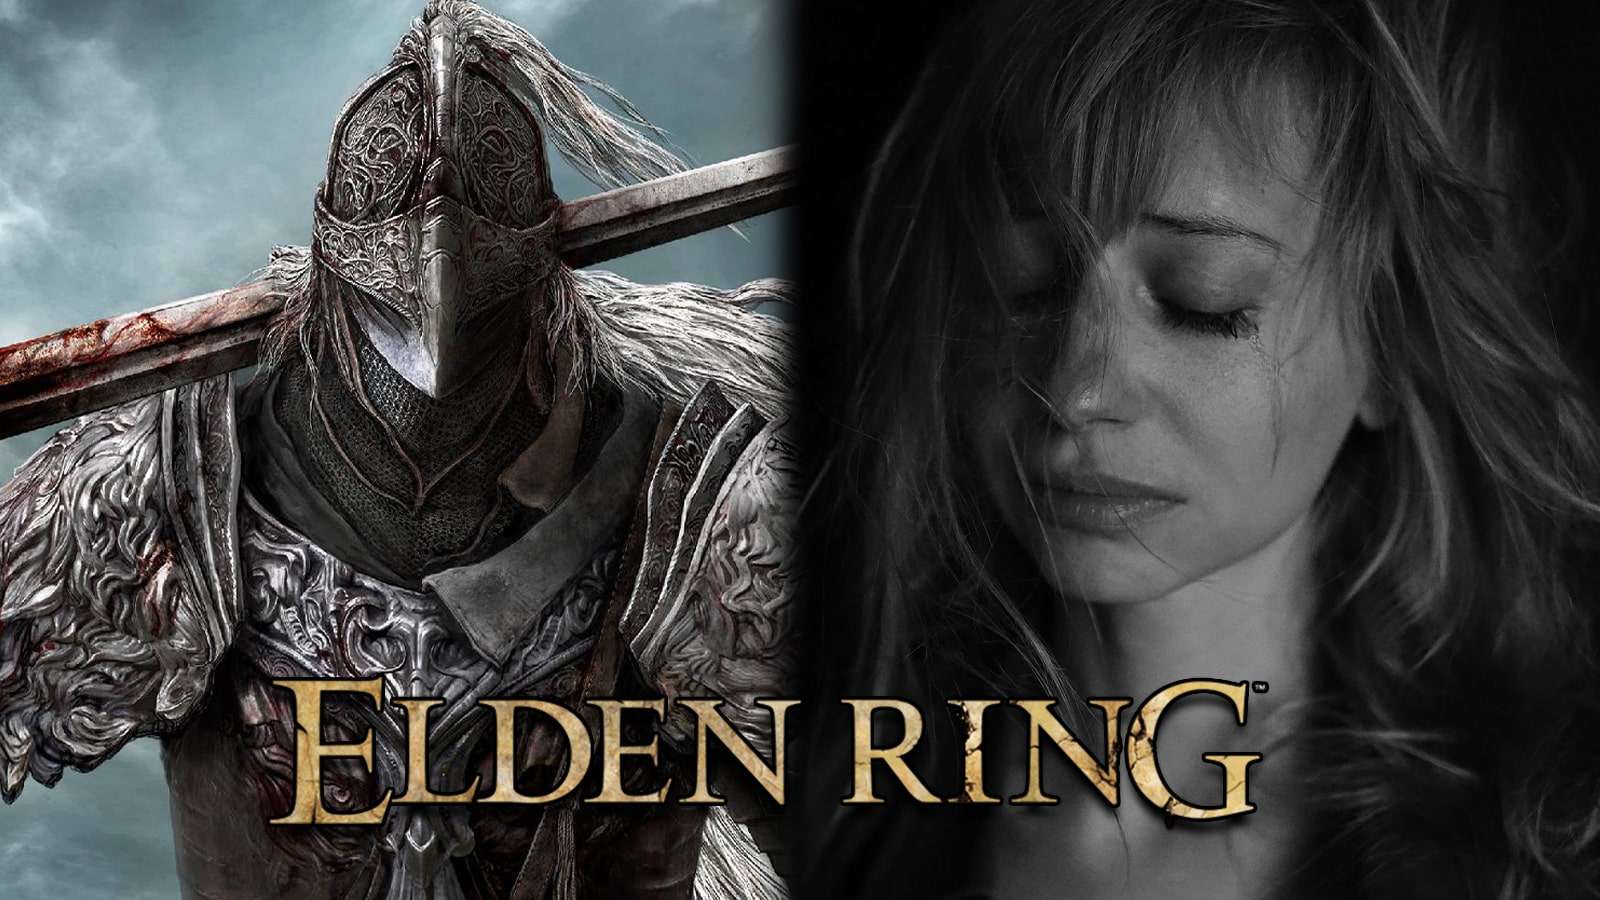 Elden Ring protagonist next to crying woman screenshot.